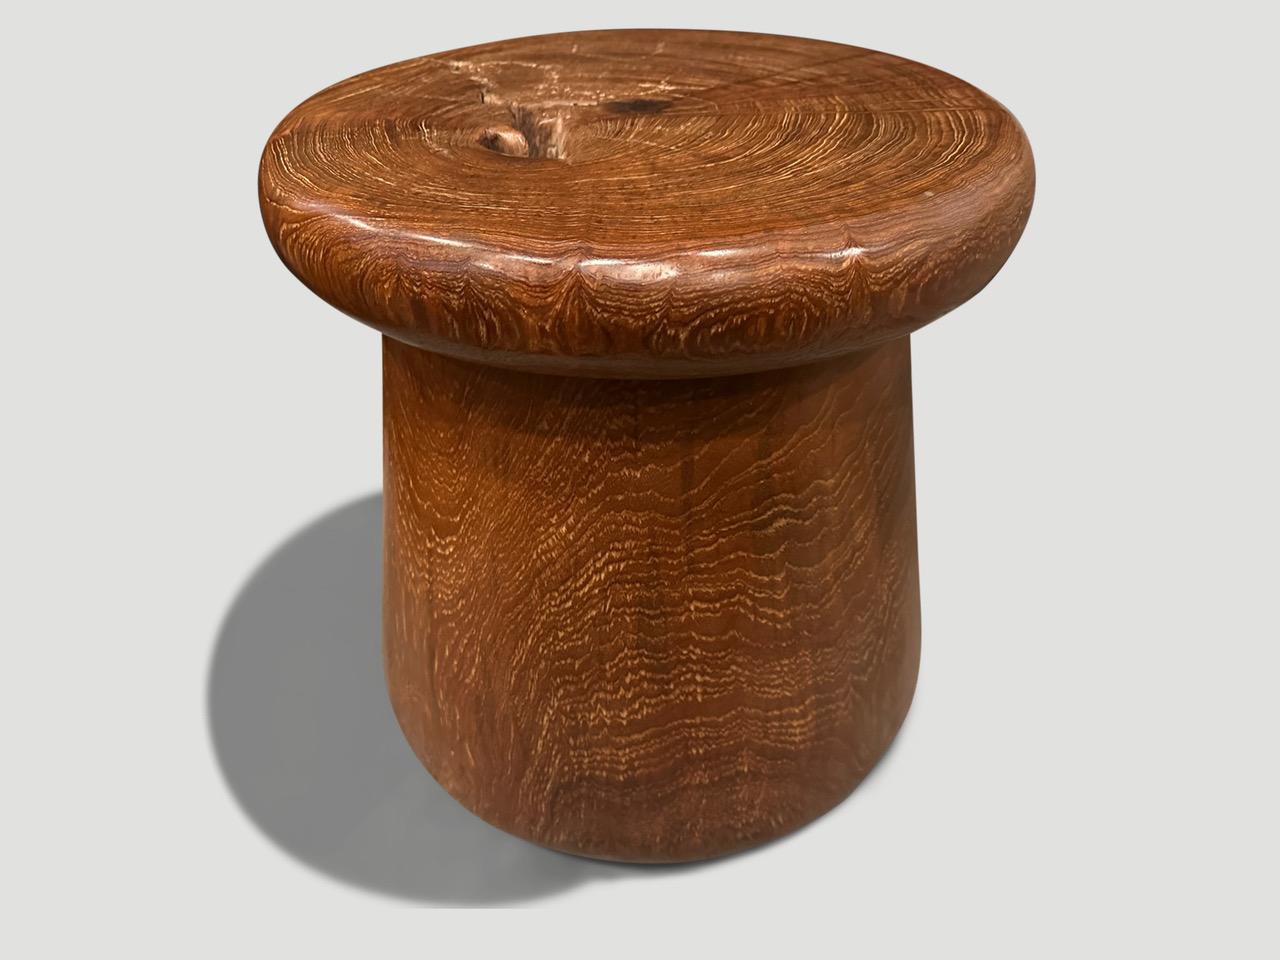 Antique mortar originally used to grind rice. We turned it upside down and smoothed out the entire piece revealing the beautiful wood grain. The inside is just eight inches hollow. Repurposed into a sculptural side table or stool. It’s all in the